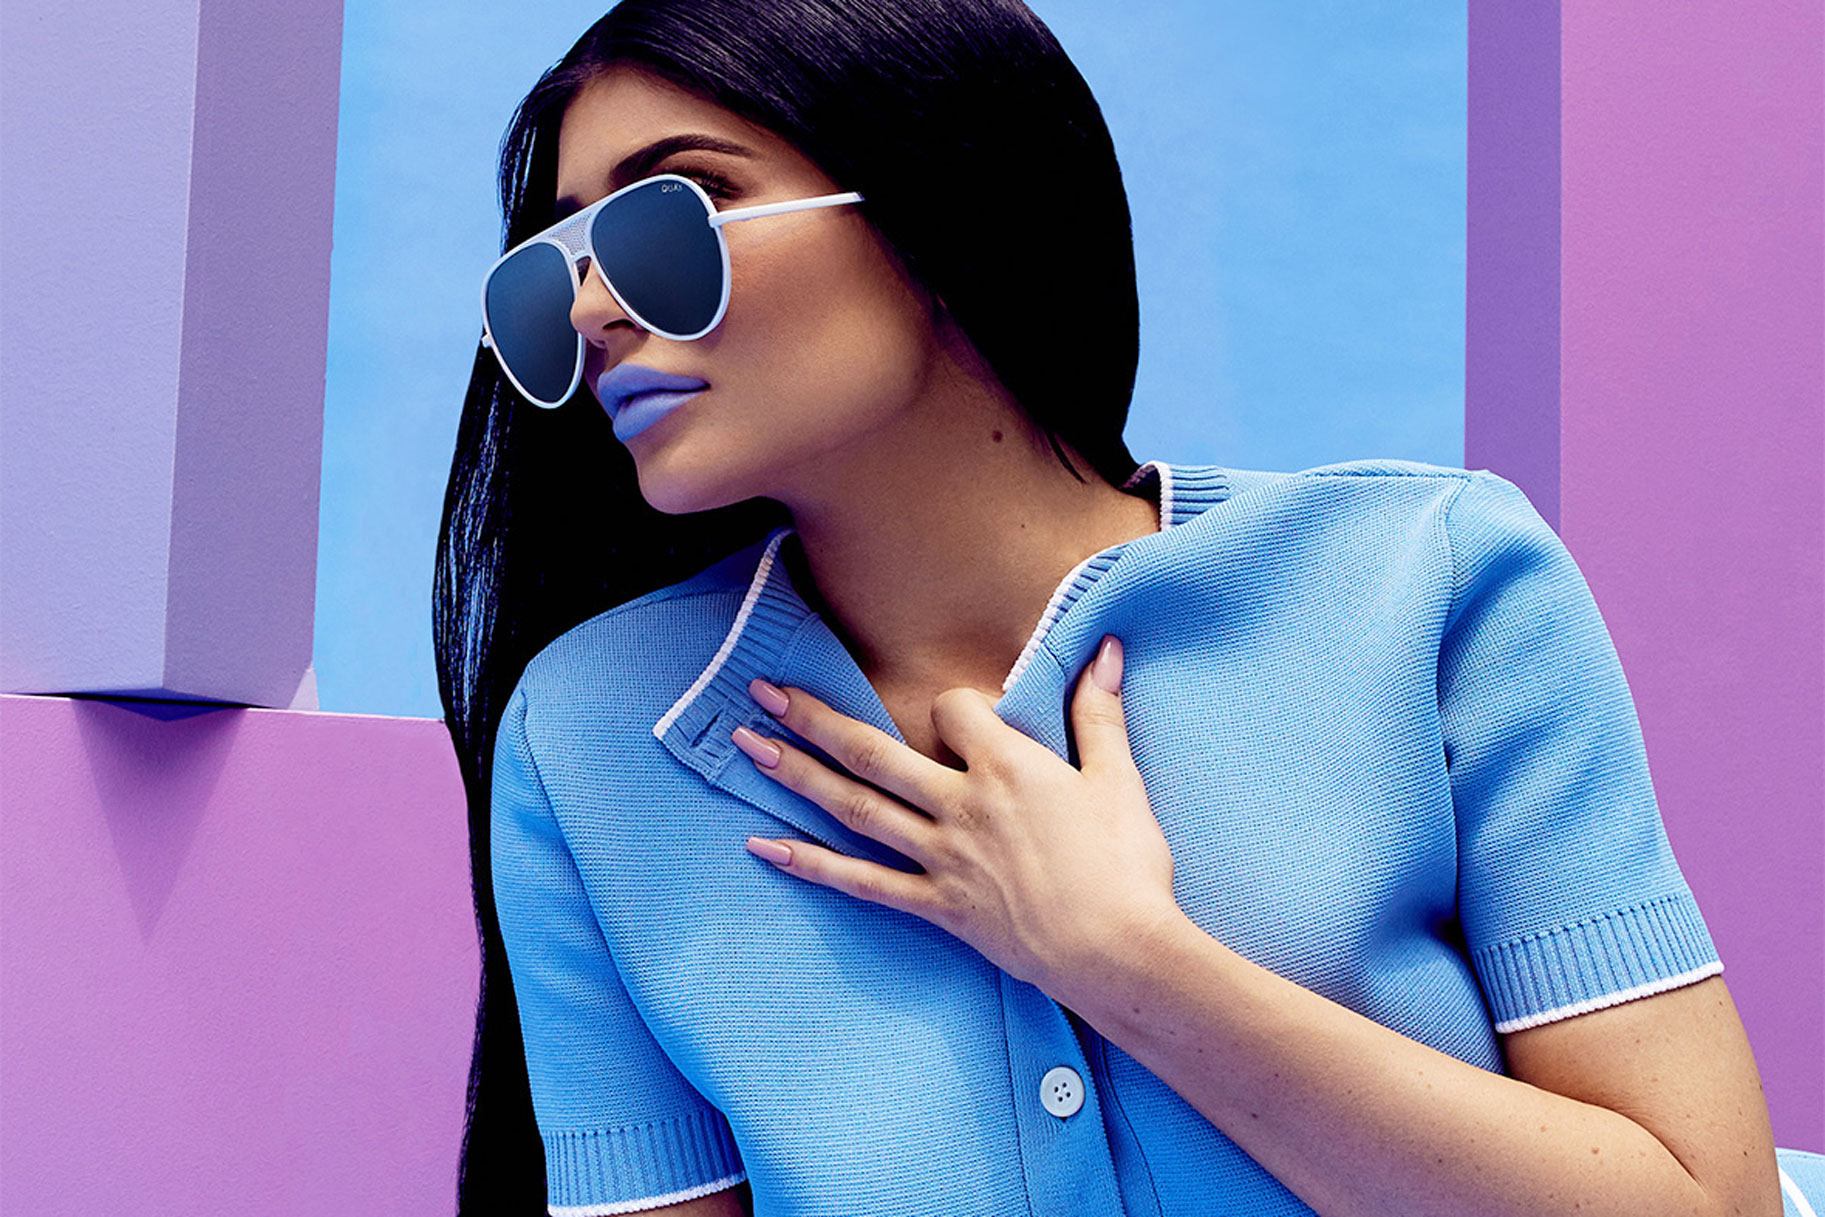 Kylie Jenner's QuayxKylie Sunglasses Collaboration Is Here | The Daily Dish